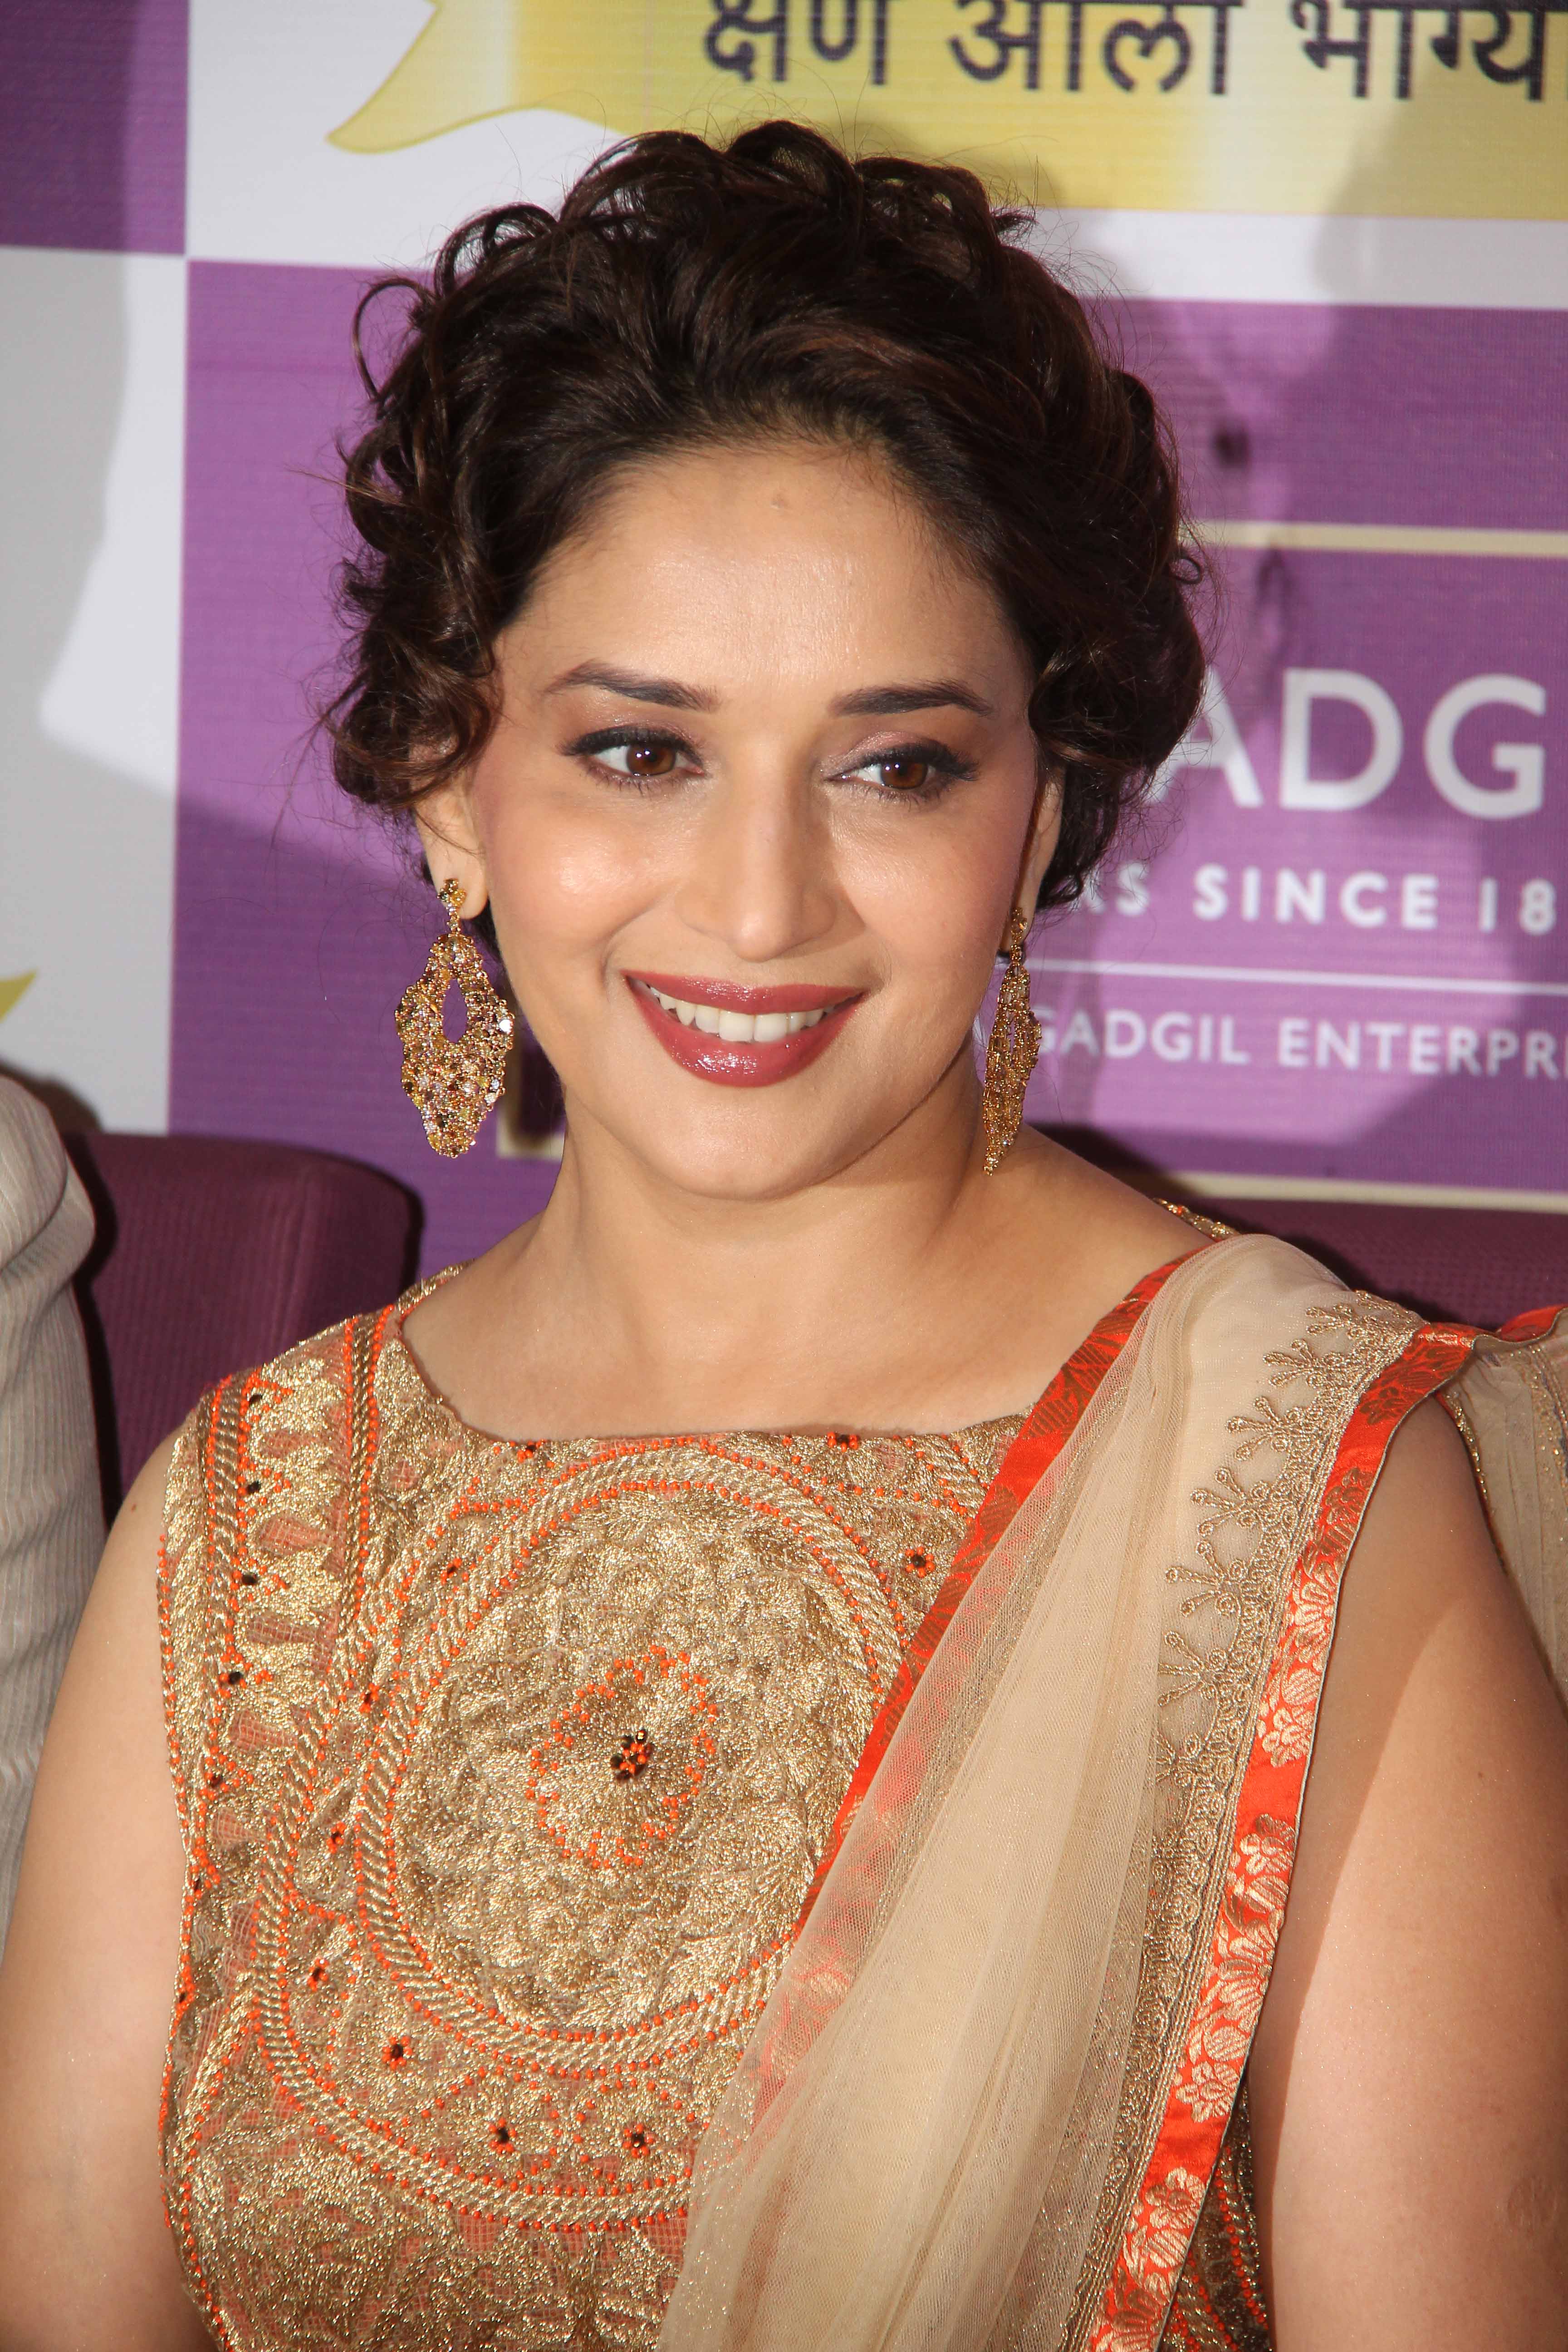 Wallpapers Of Madhuri Dixit